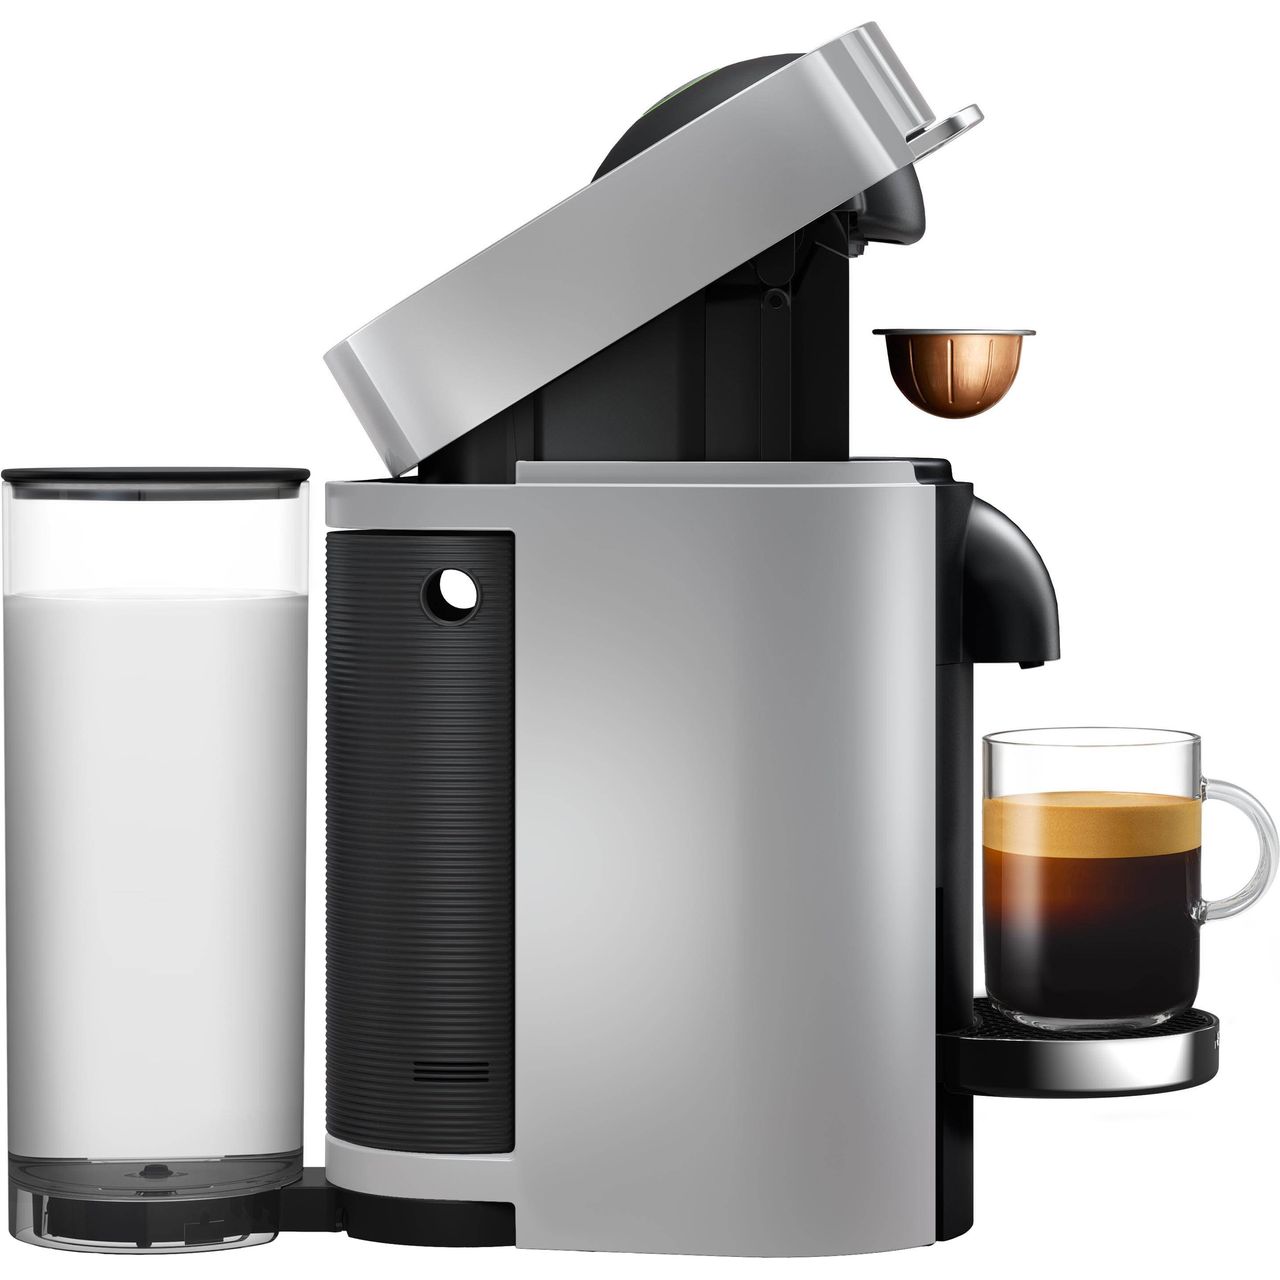 Nespresso's Vertuo Plus pod coffee machine is a whopping 39% off for EOFY